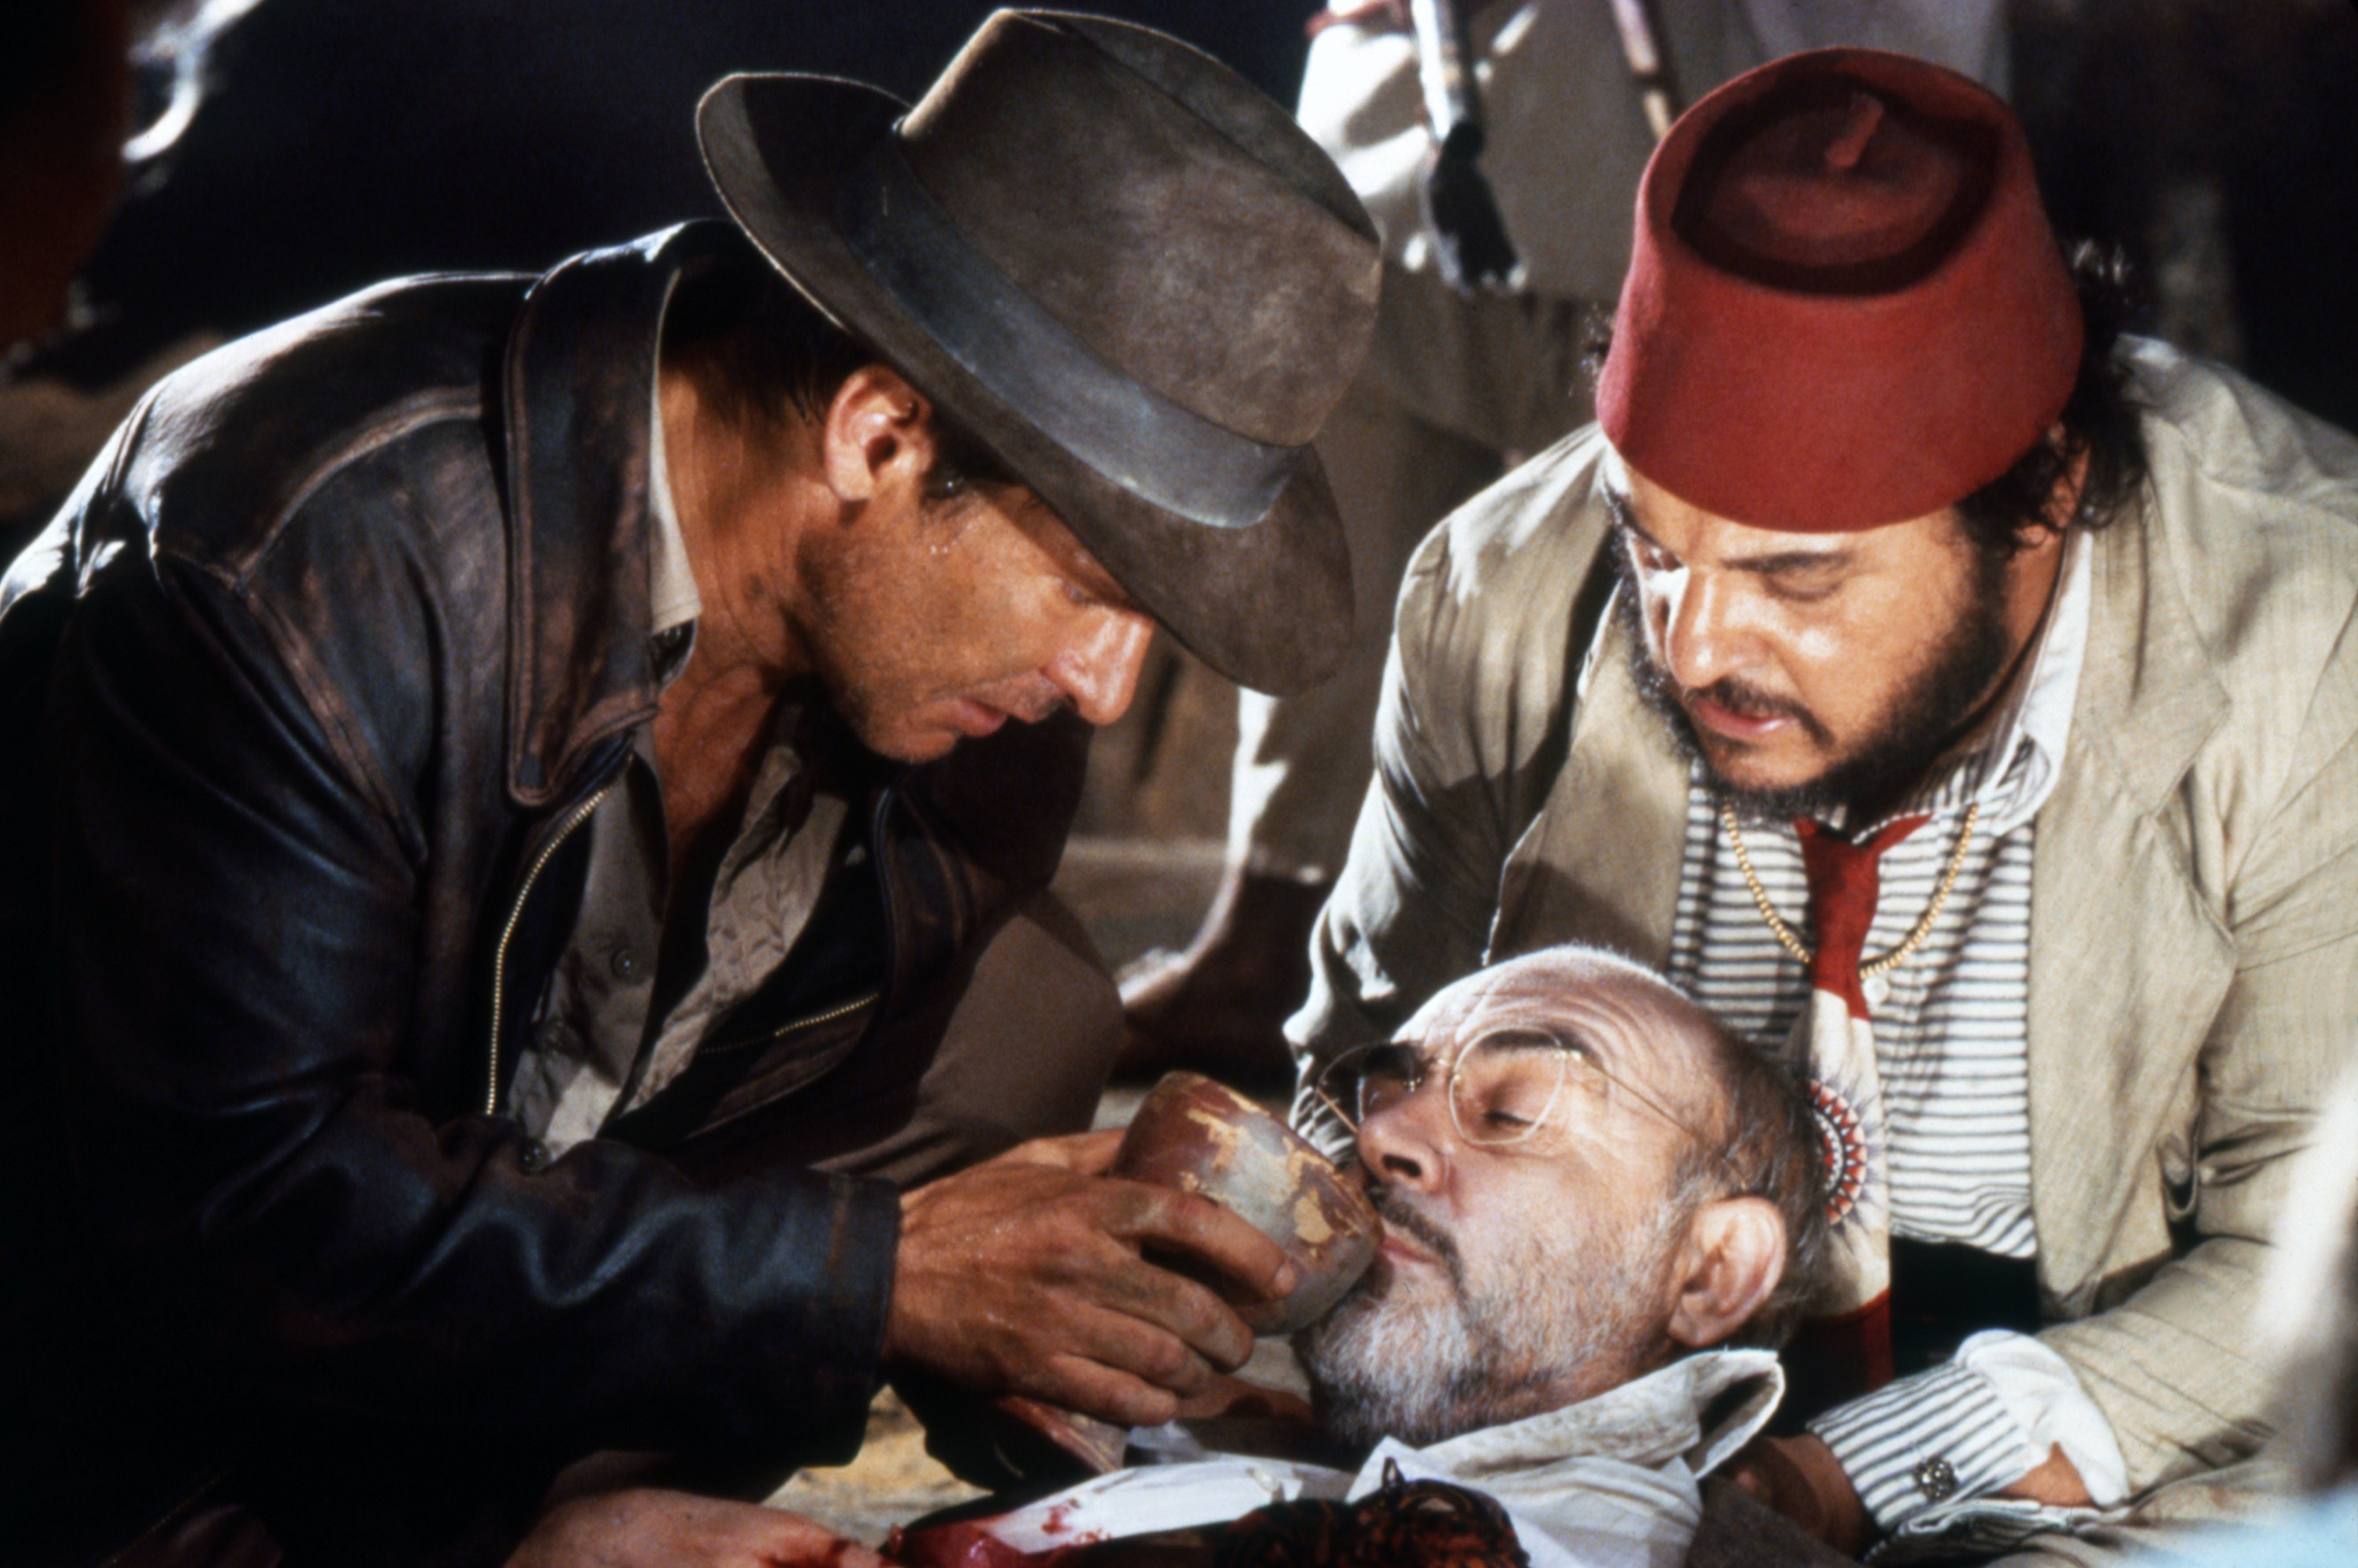 Harrison Ford, John Rhys-Davies, and Sean Connery on the set of "Indiana Jones and the Last Crusade." | Source: Getty Images